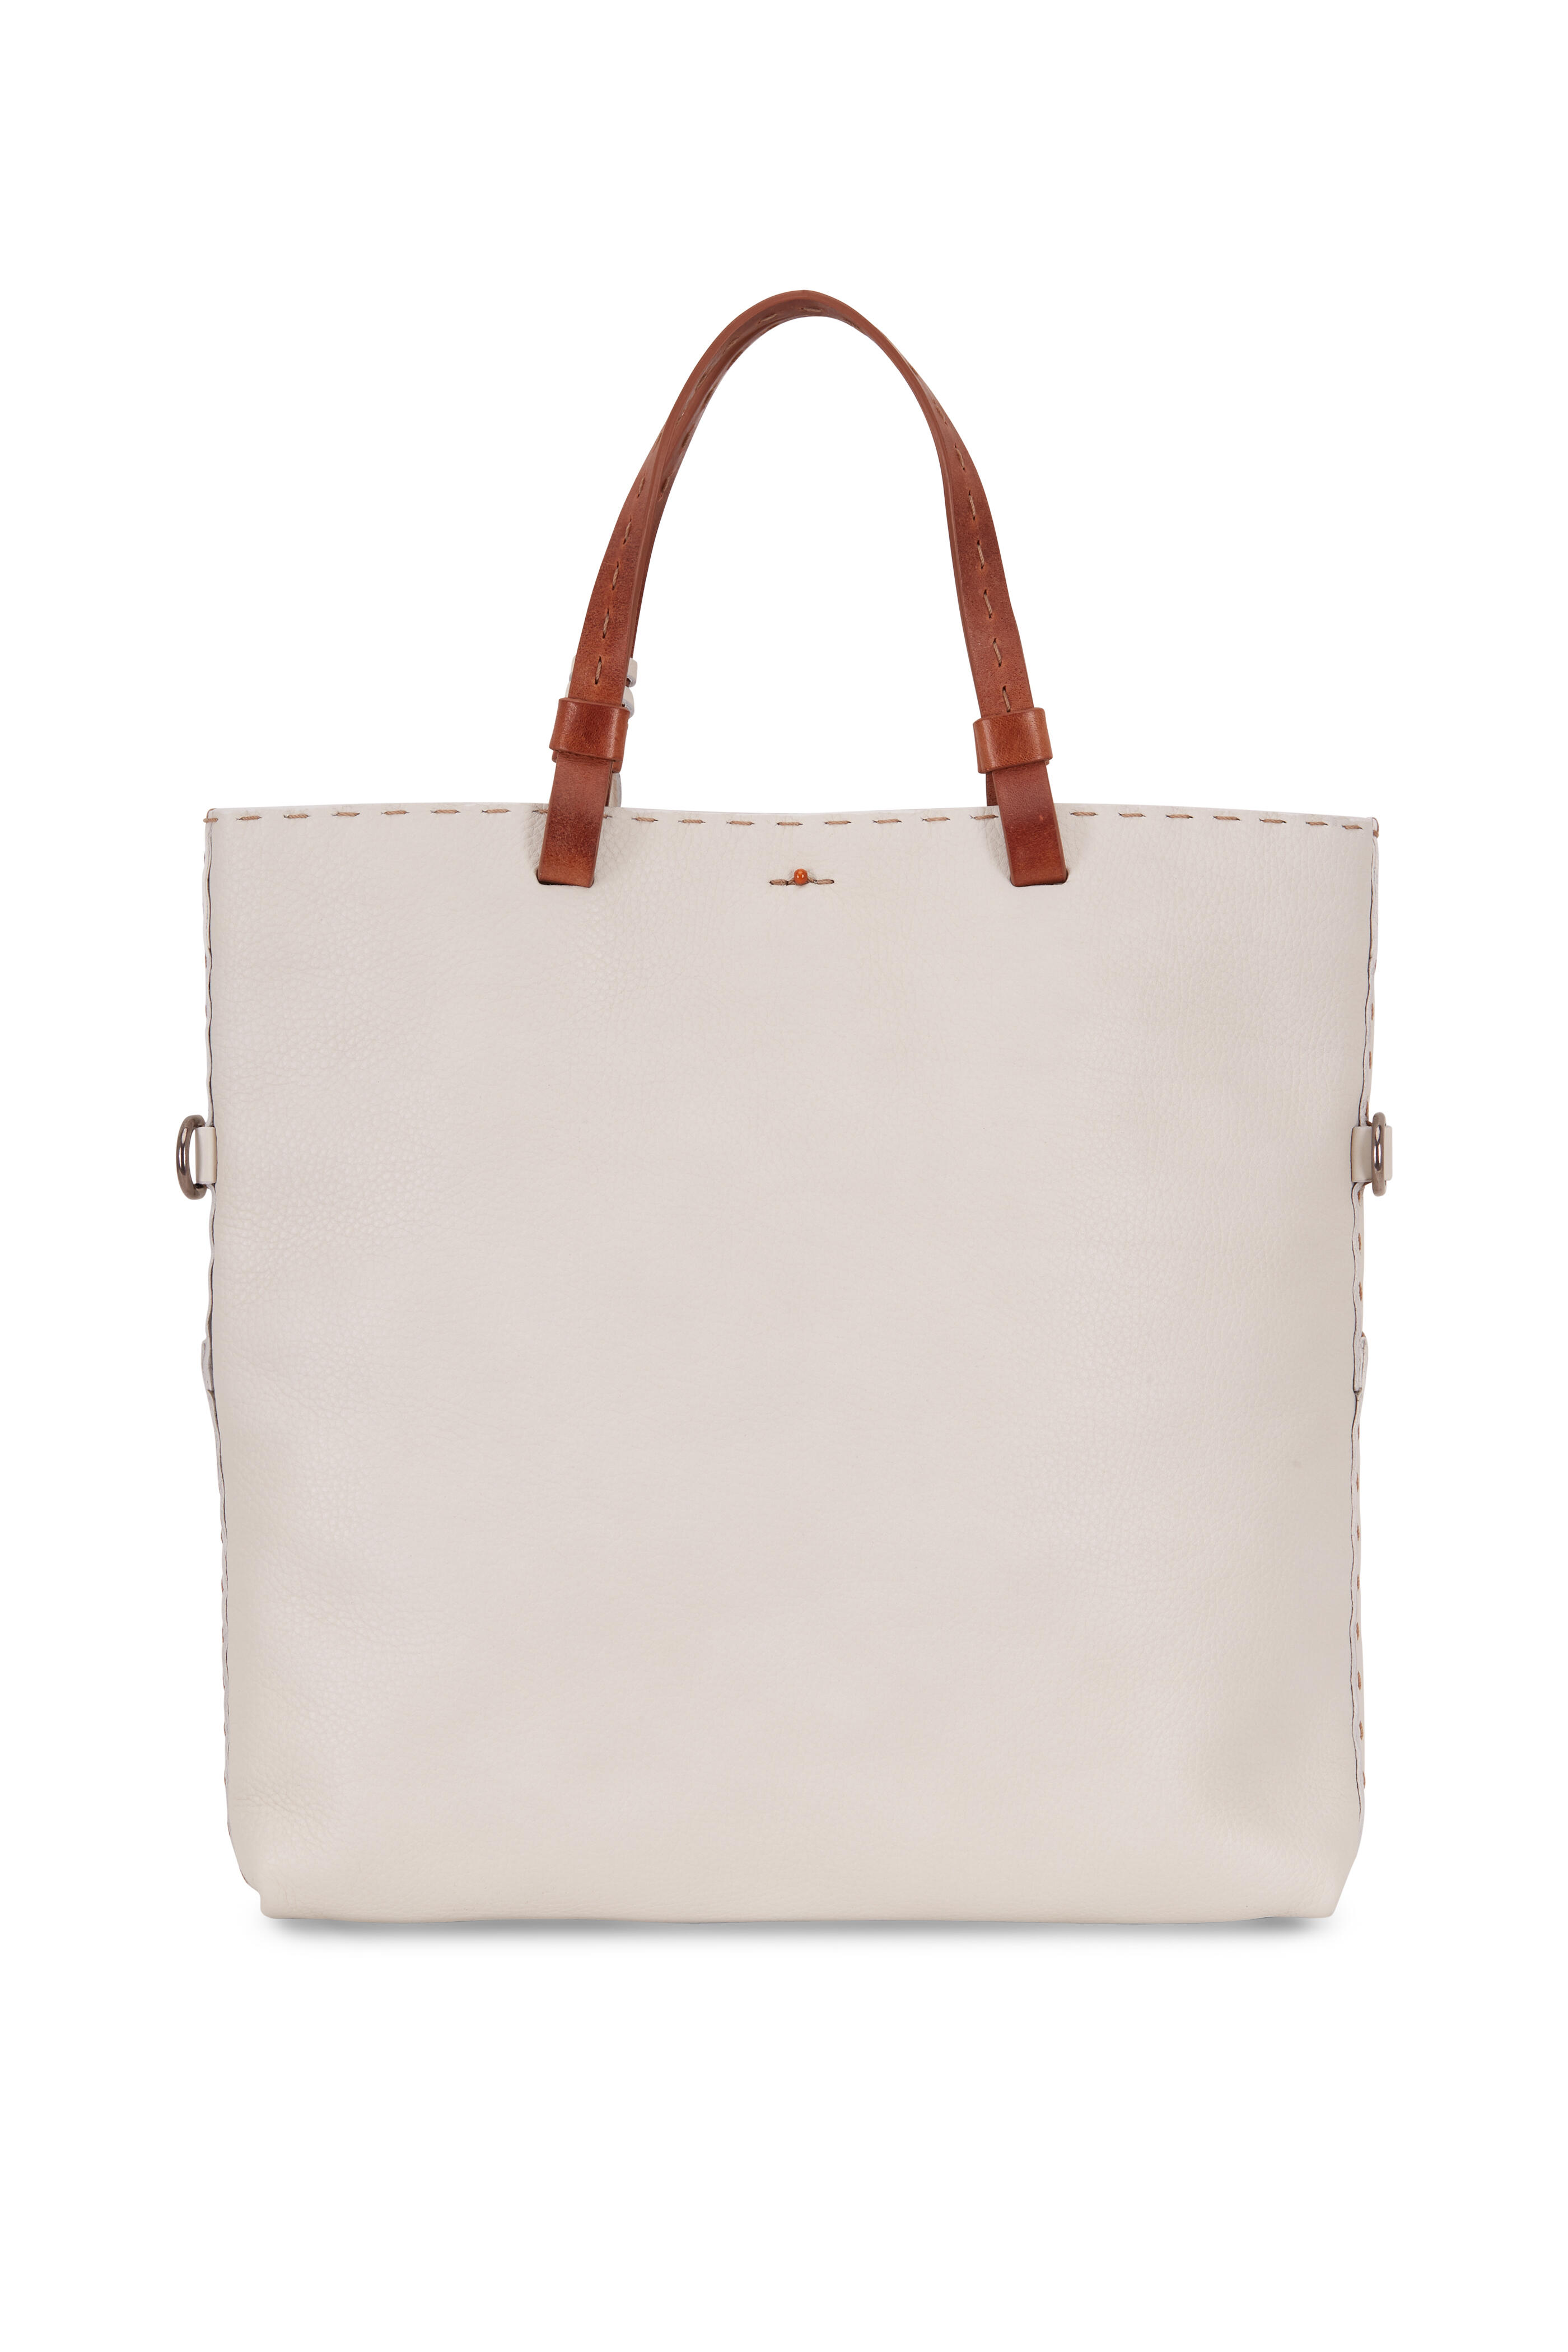 Henry Beguelin - Folder Gesso Off-White Grained Leather Bag